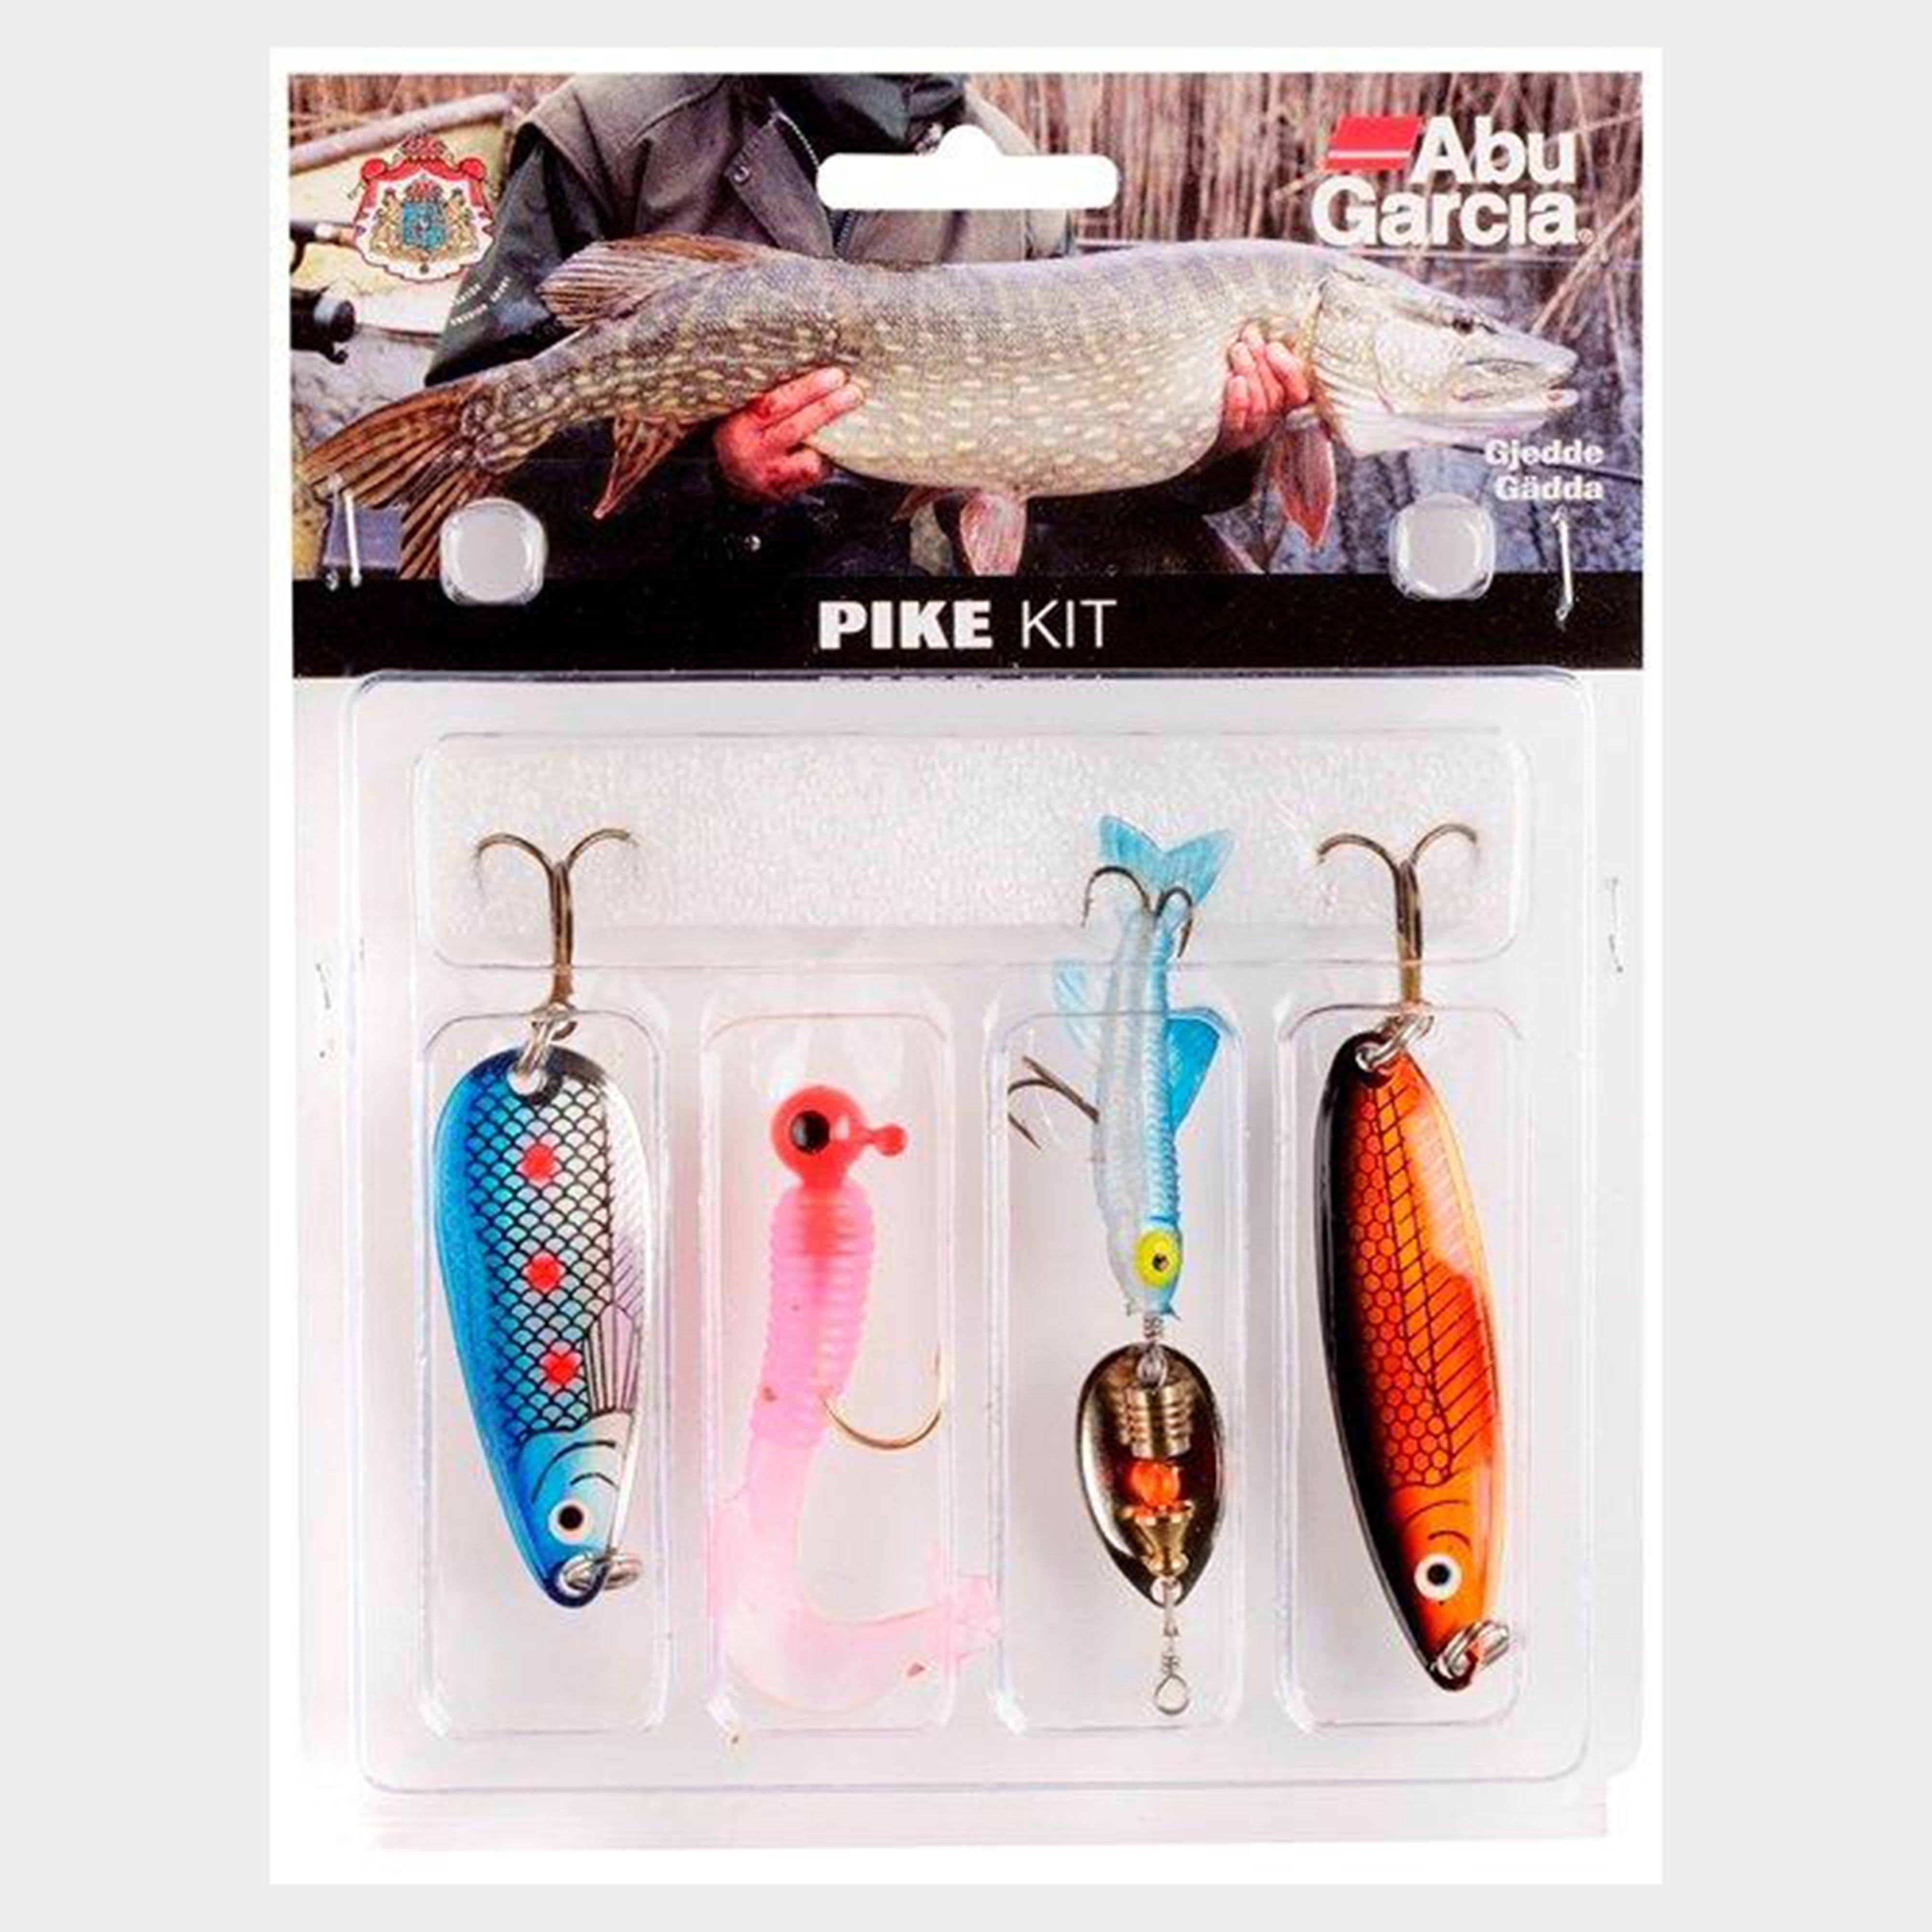 Abu Garcia Trout Spinner Lure Kit Set Pack of 4 Spoons Perch Pike Fishing 